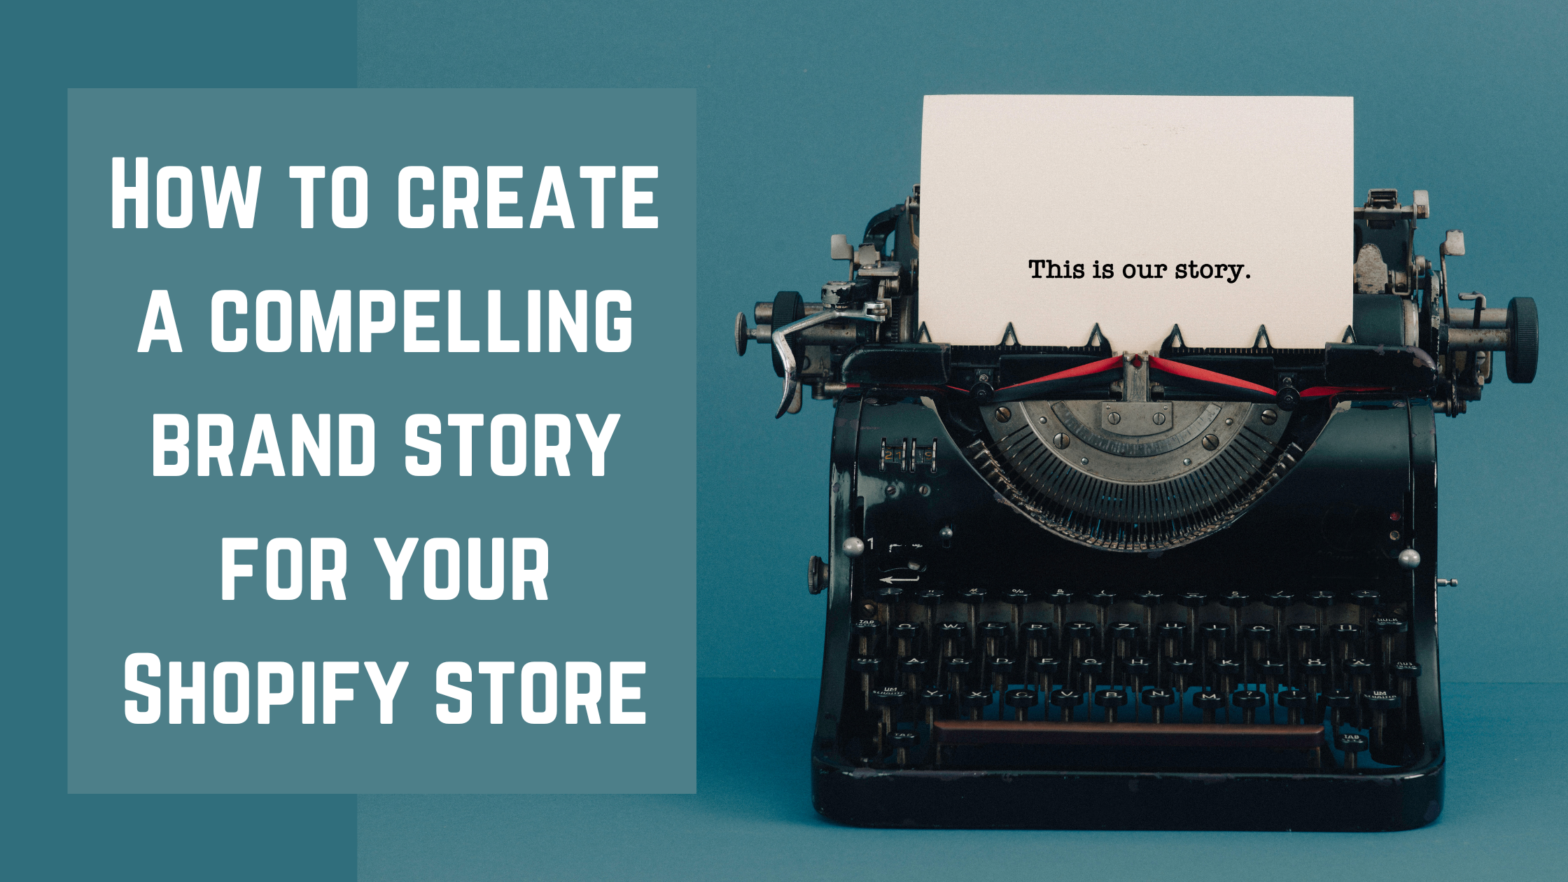 Featured Image: How To Create A Compelling Brand Story For Your Shopify Store